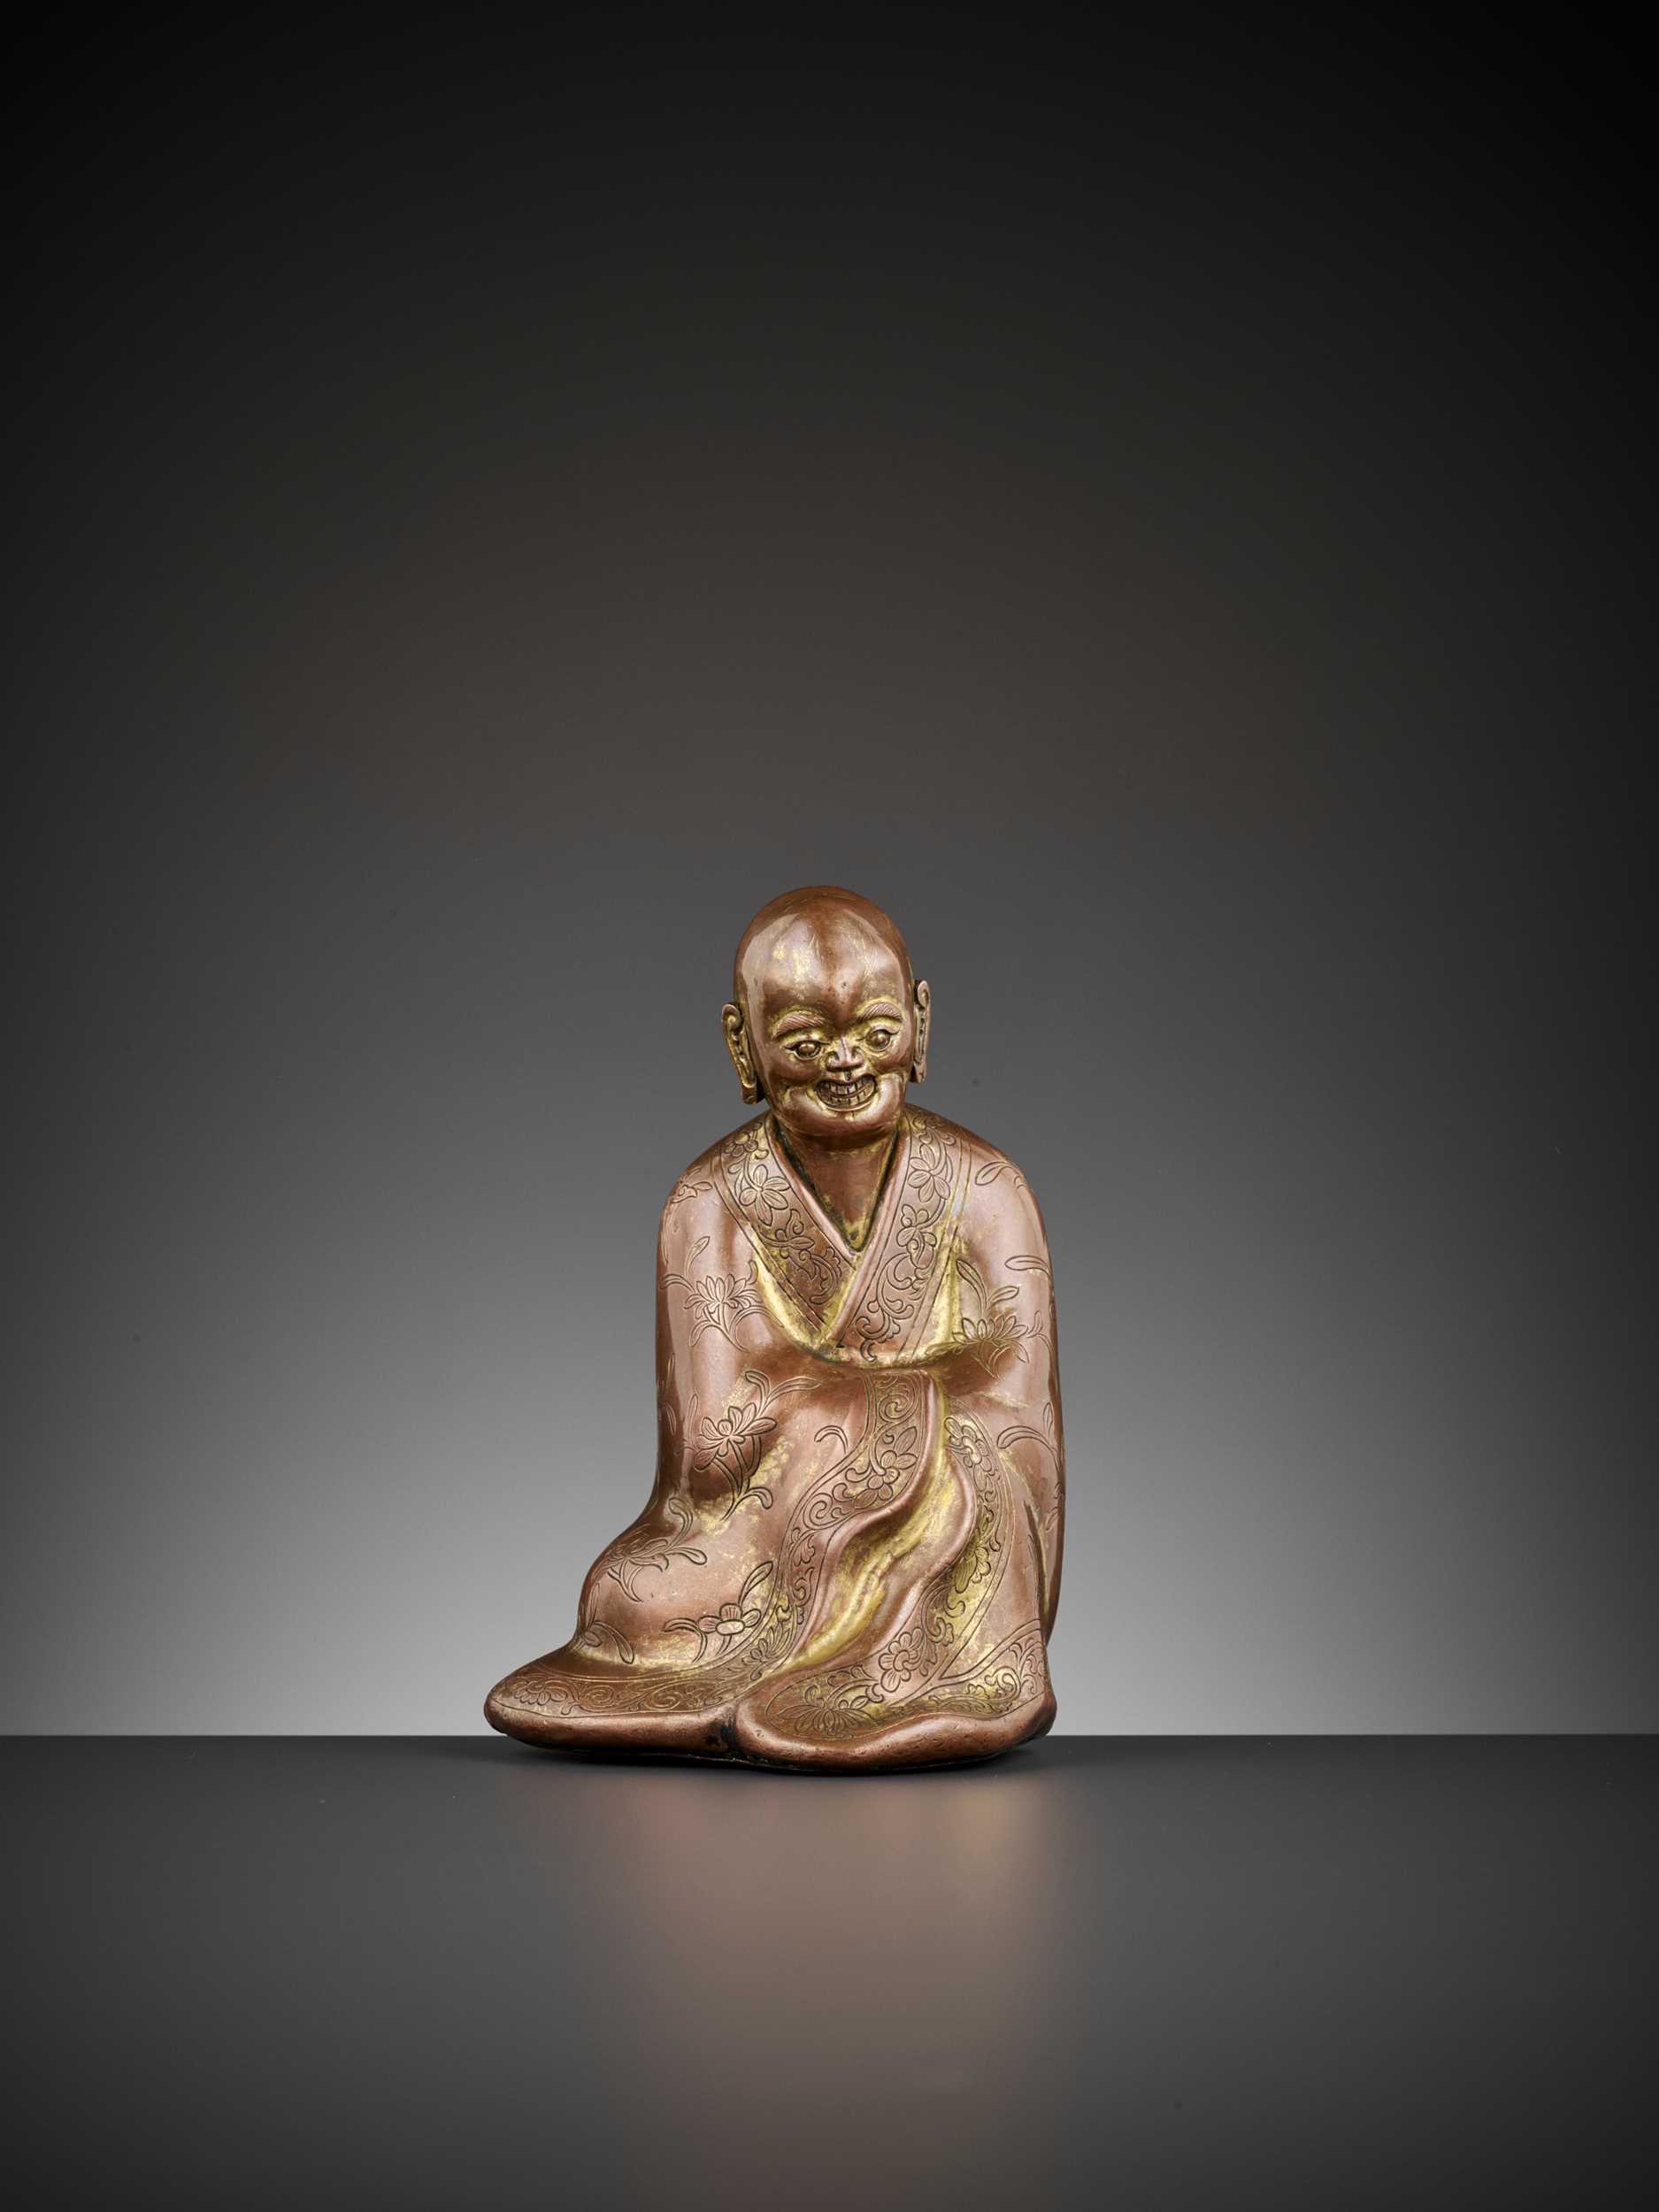 Lot 82 - A GILT COPPER ALLOY FIGURE OF A LUOHAN, 17TH CENTURY